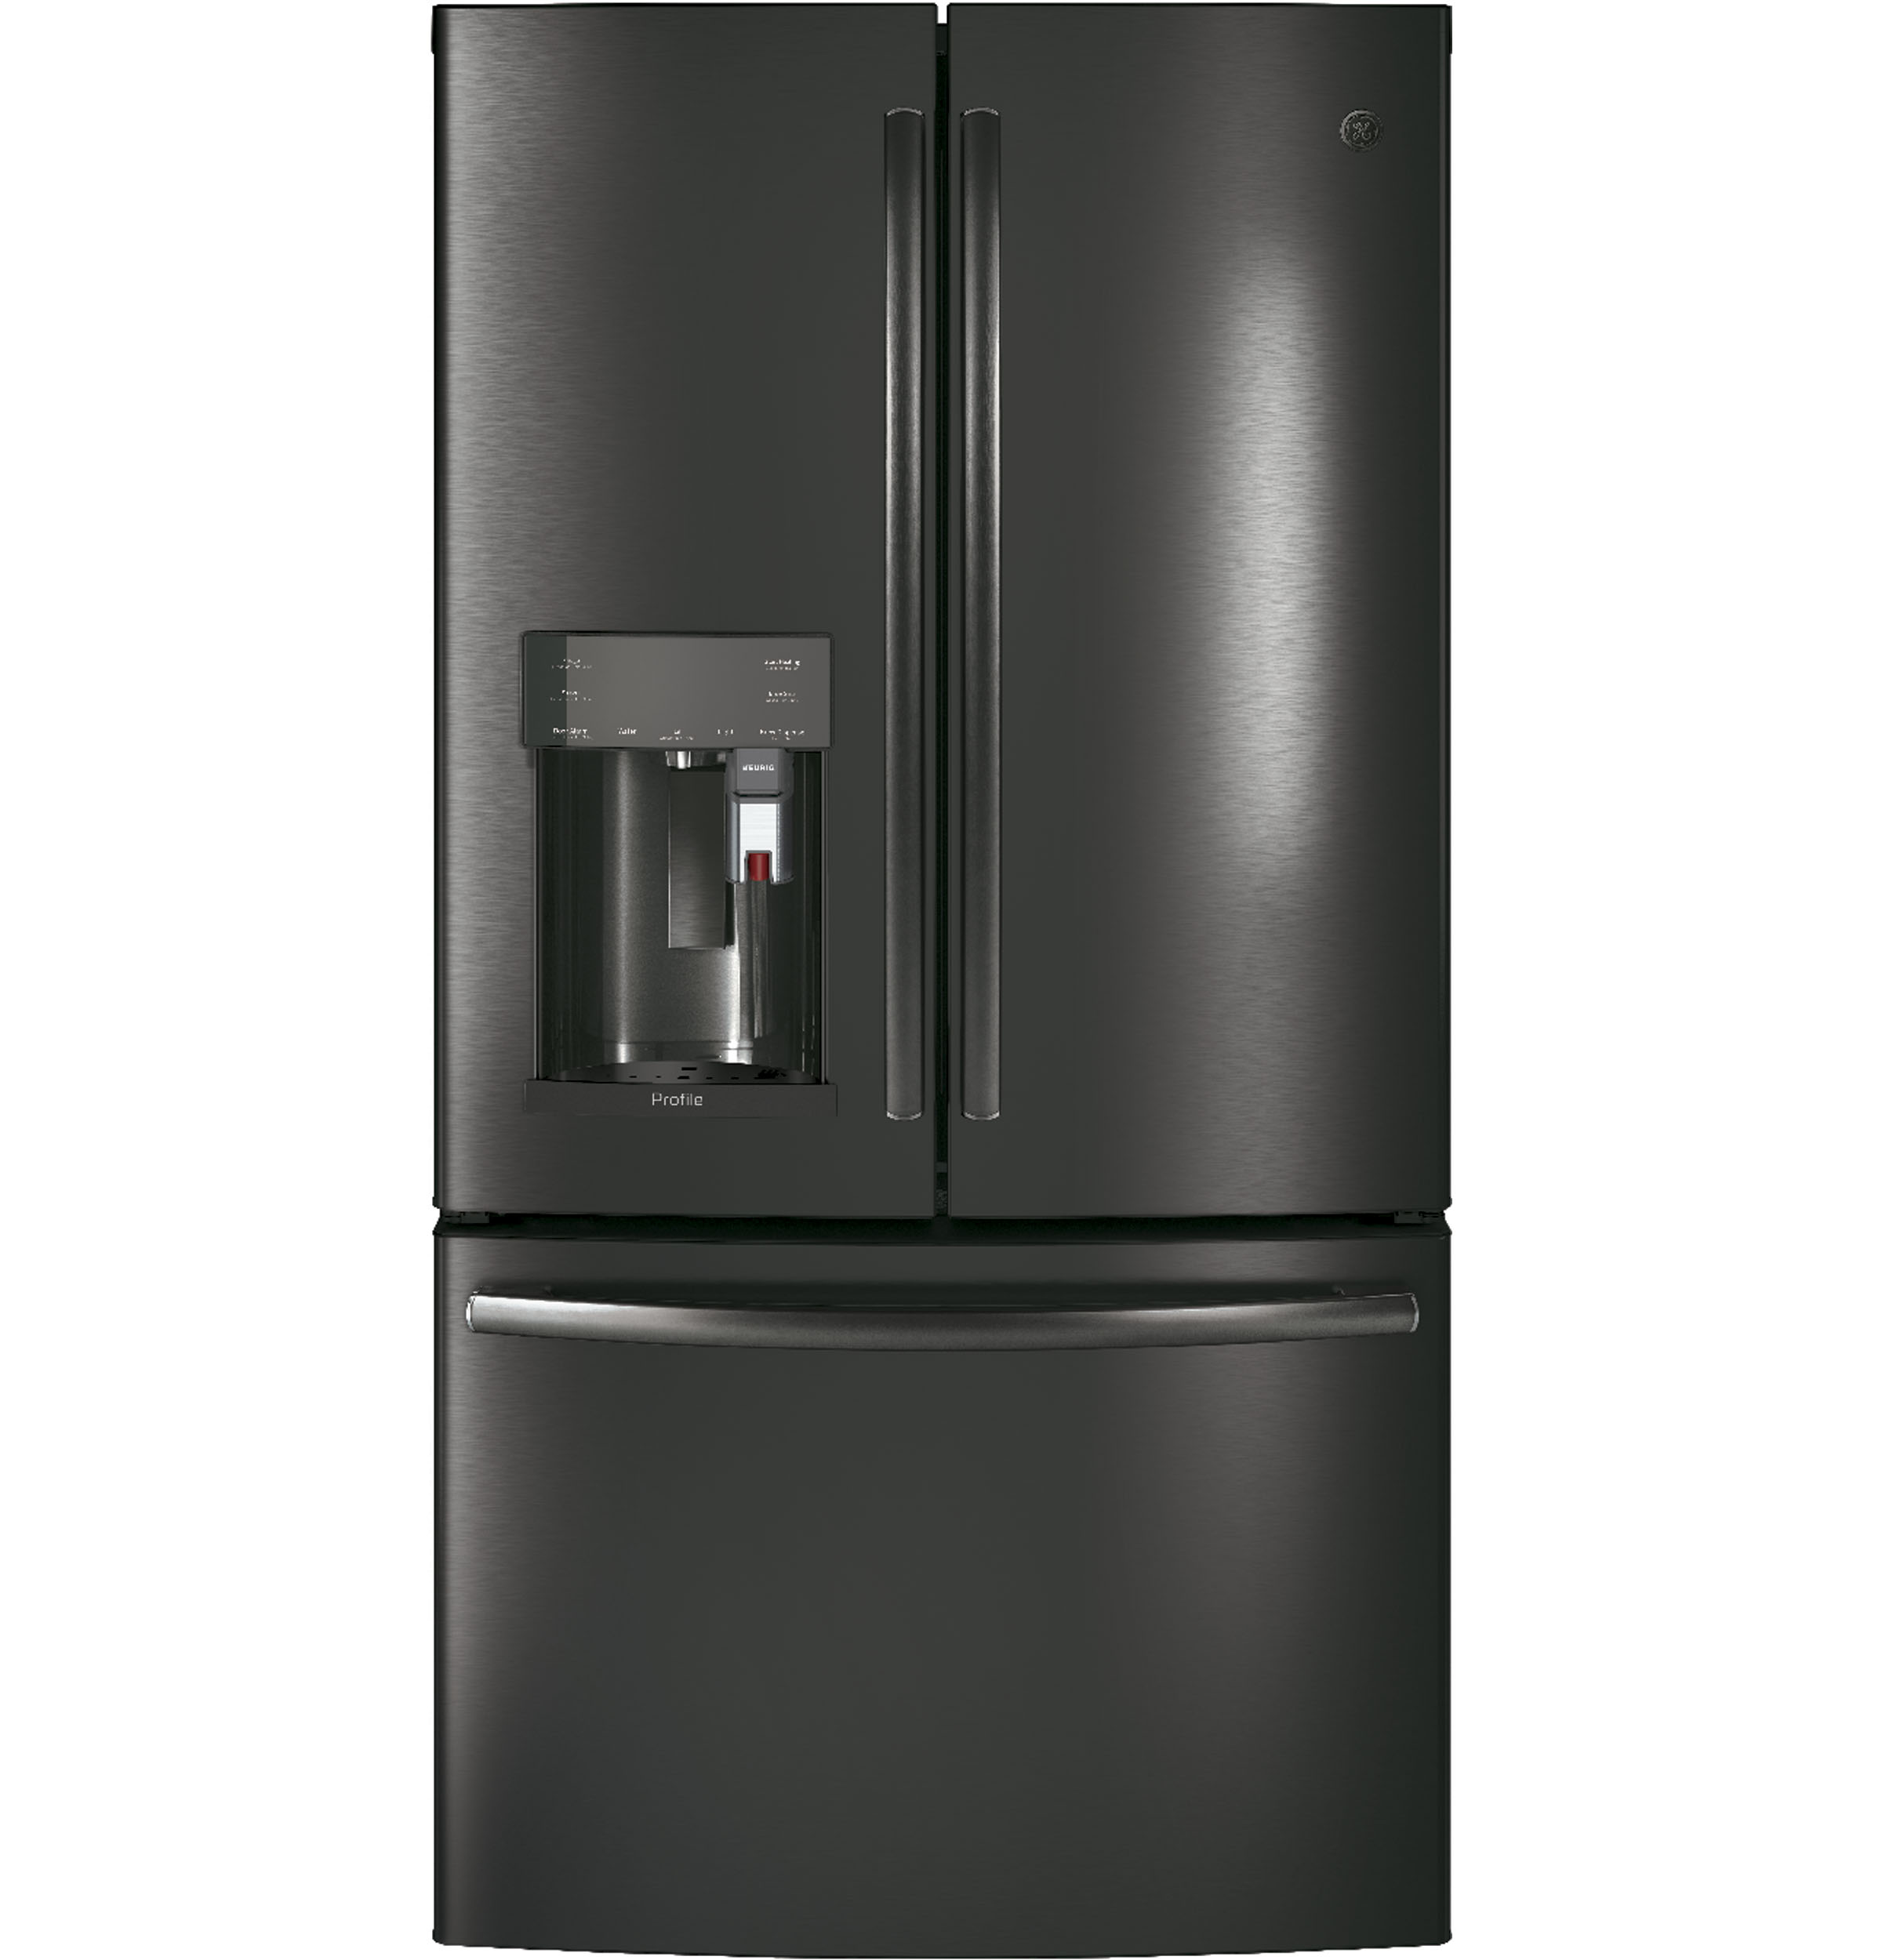 GE Profile™ Series ENERGY STAR® 27.8 Cu. Ft. French-Door Refrigerator with Keurig® K-Cup® Brewing System